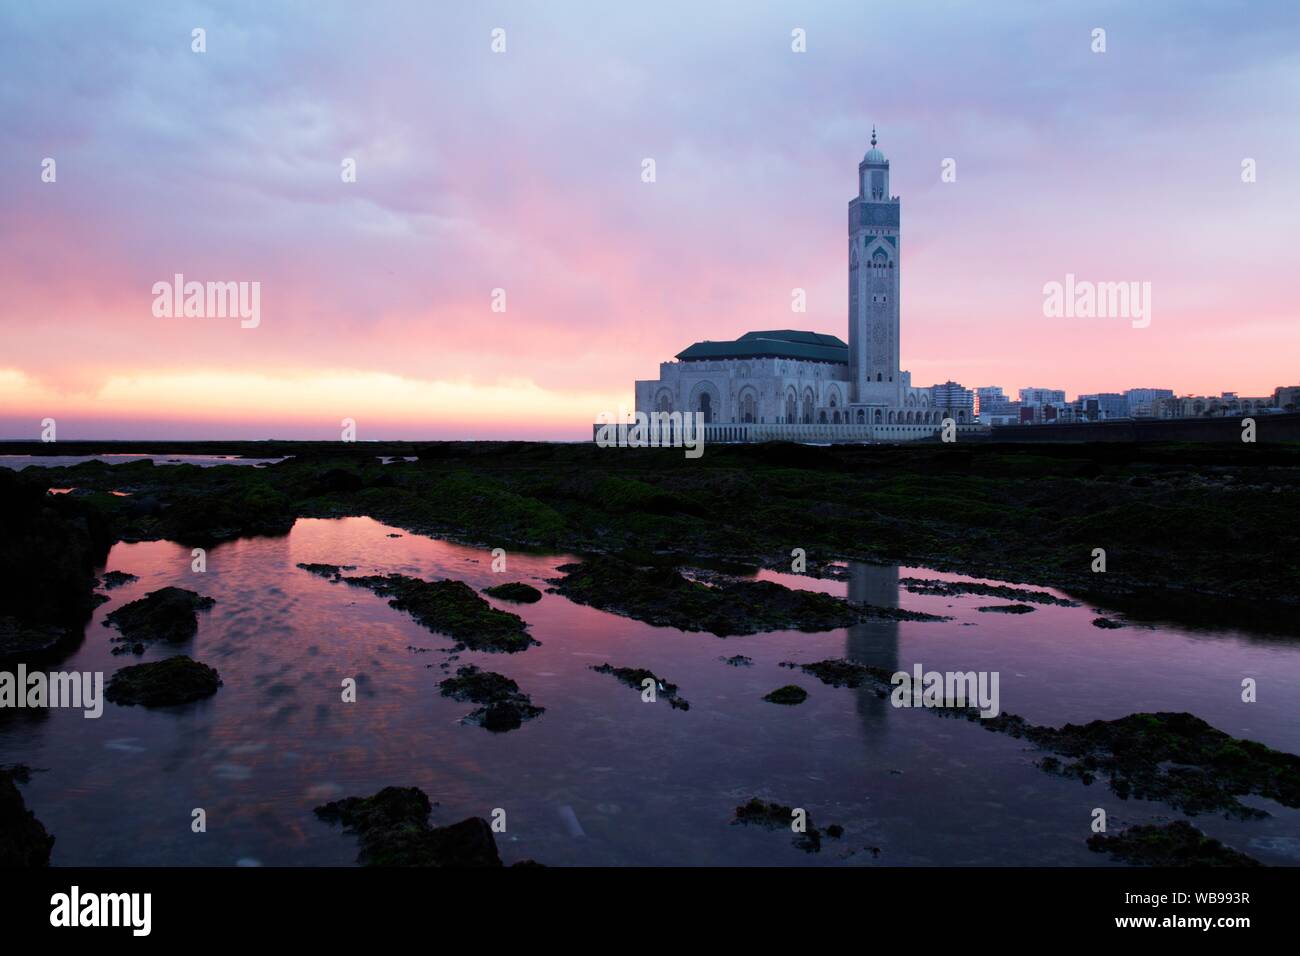 The most famous and impressive building in Casablanca - Mosque Hassan-II. Stock Photo